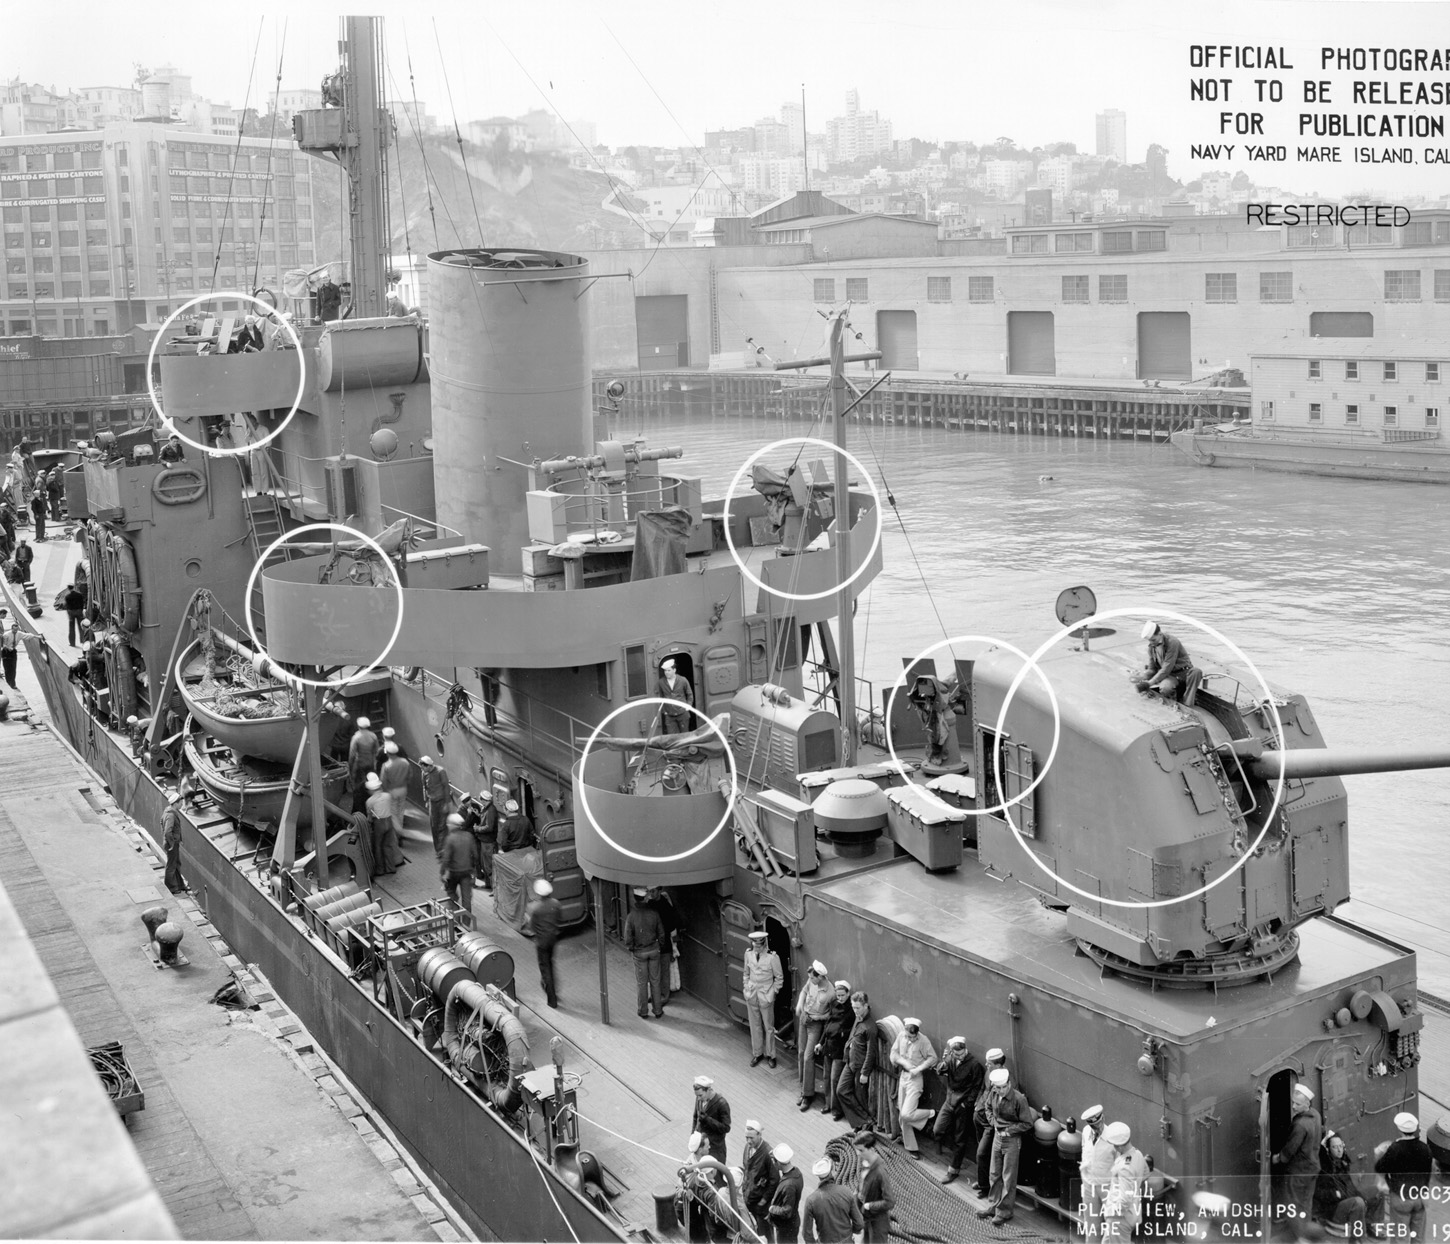 Departing the Mare Island Navy Yard, the Taney sports new armament upgrades, including new enclosed 5-inch turrets and several 20mm antiaircraft guns.